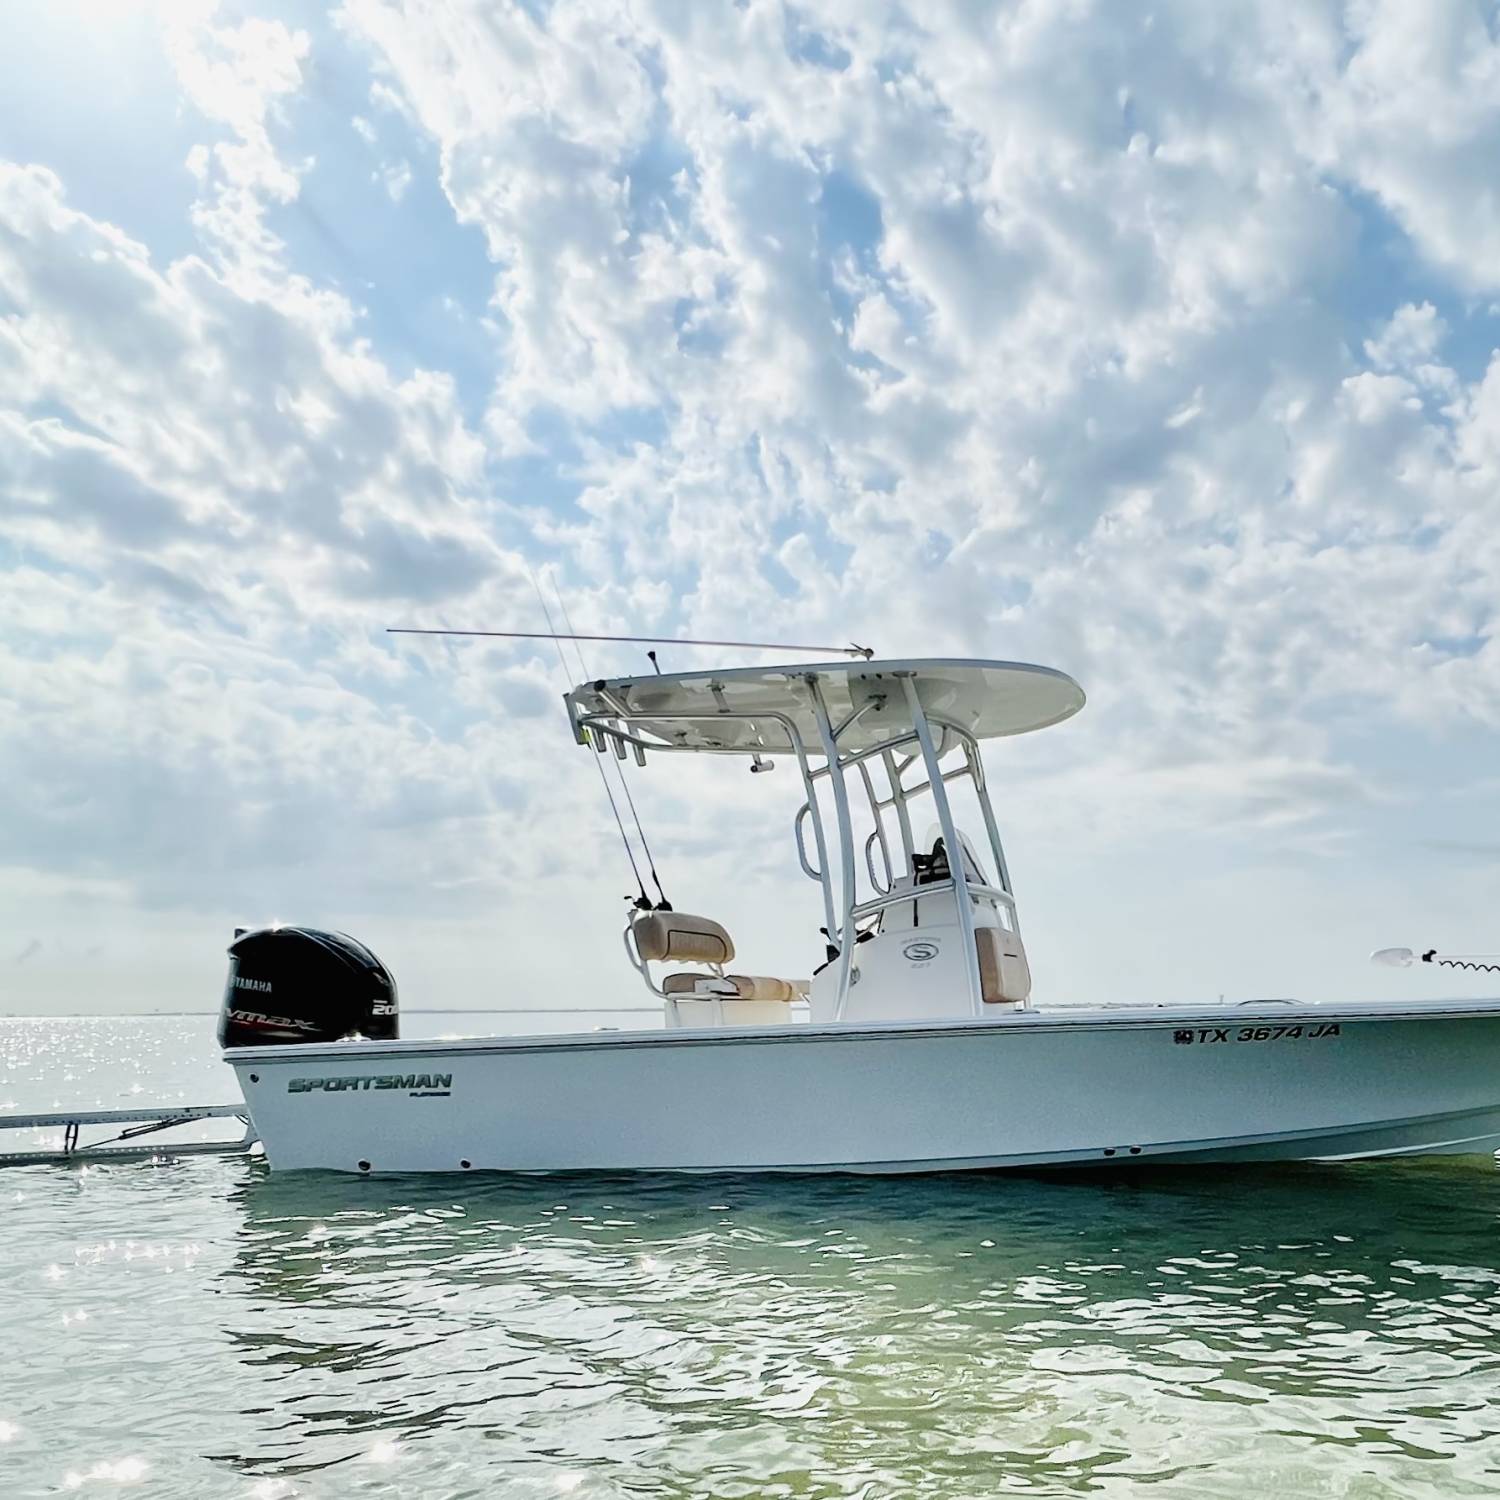 Title: Solo Wade - On board their Sportsman Masters 227 Bay Boat - Location: West Galveston Bay. Participating in the Photo Contest #SportsmanAugust2023